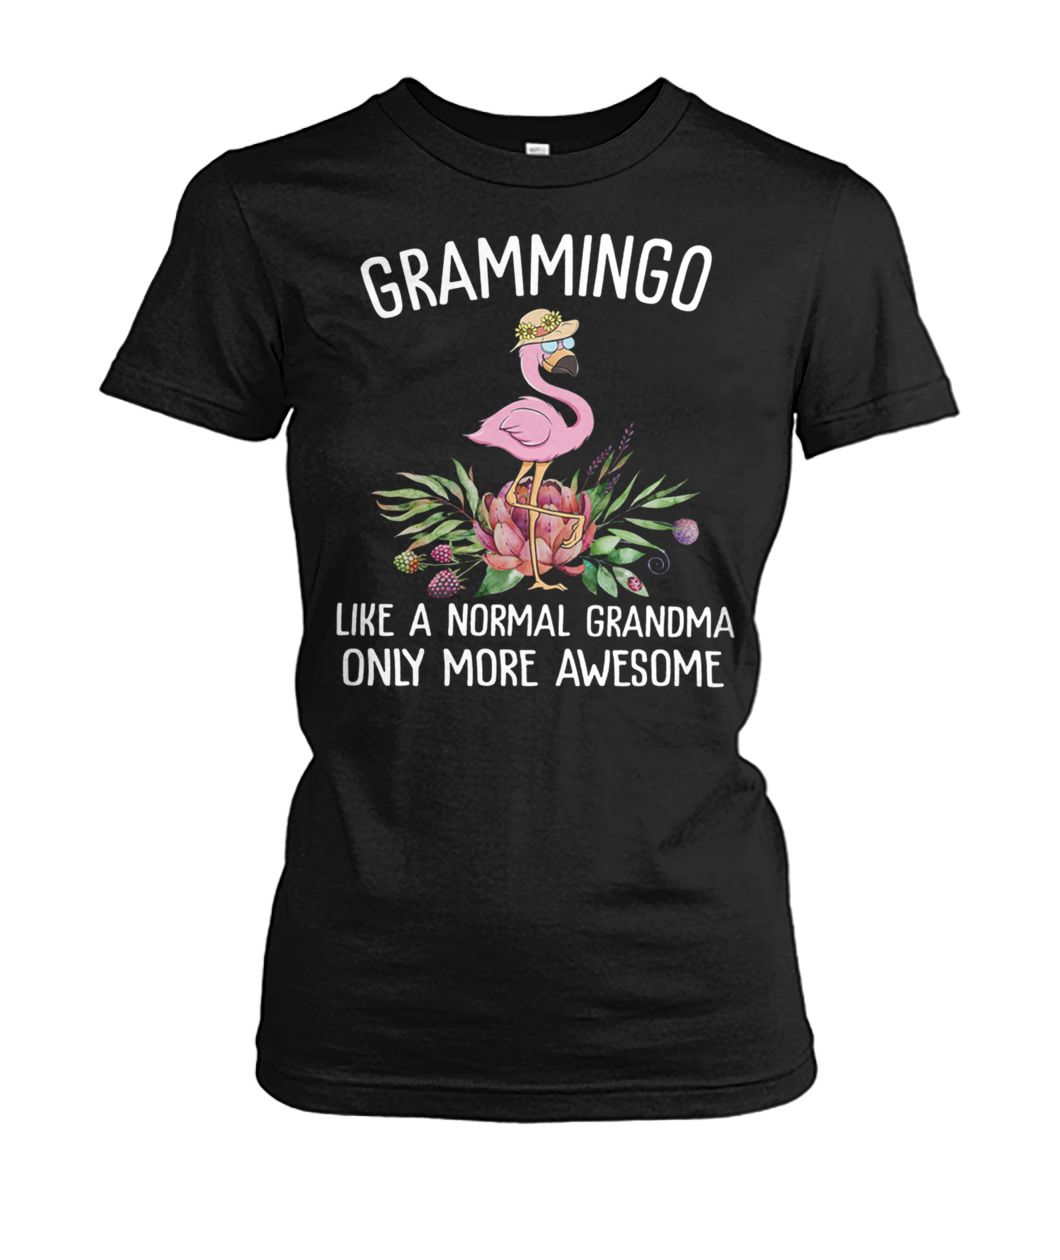 Grammingo like a normal grandma only more awesome women's crew tee